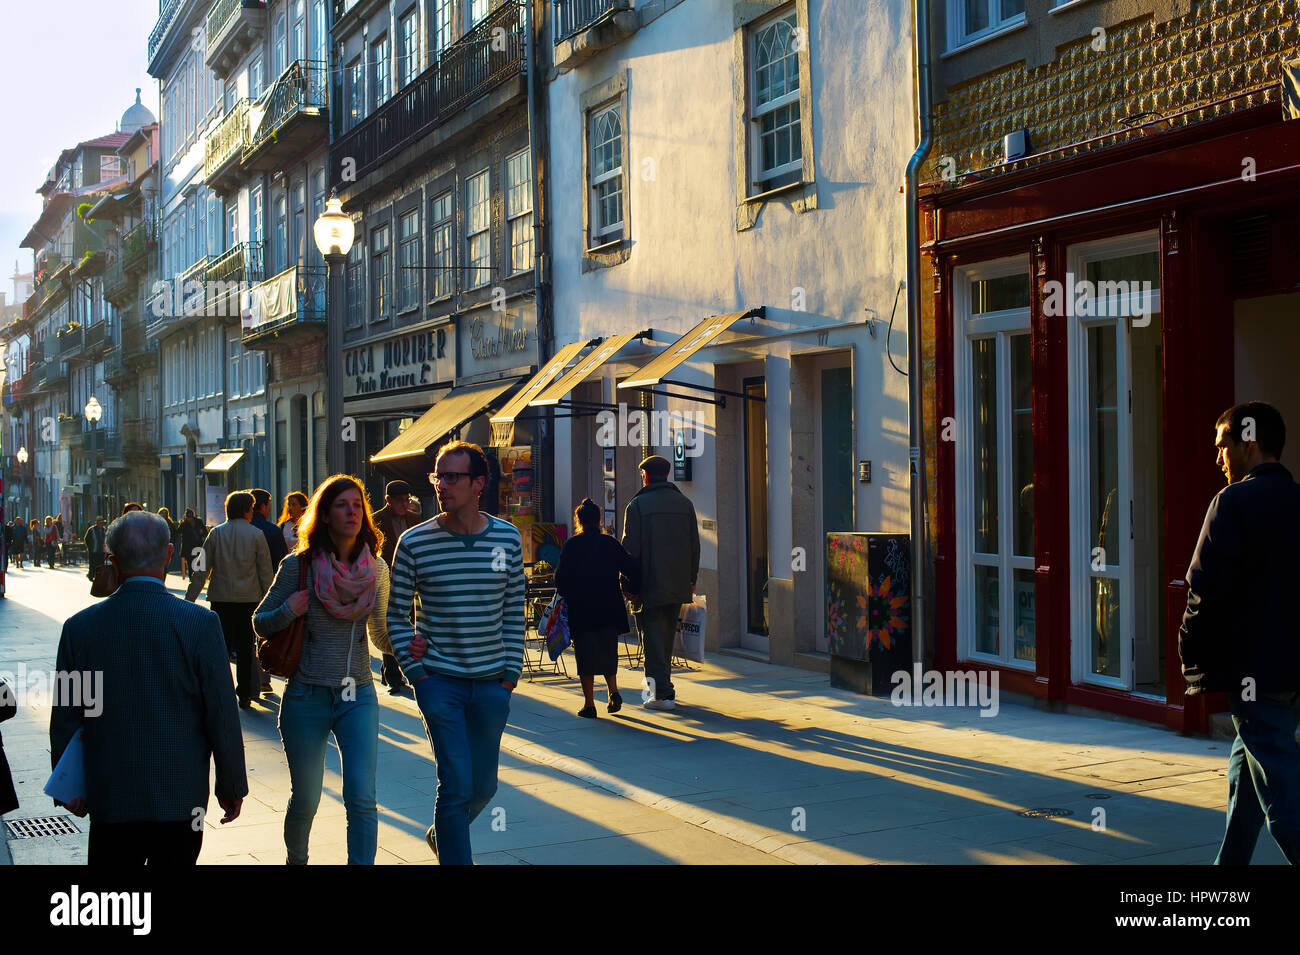 PORTO, PORTUGAL - NOV 18, 2016: People walking at Old Town street of Porto at sunset. Porto is the famous tourist destiantion in Portugal Stock Photo